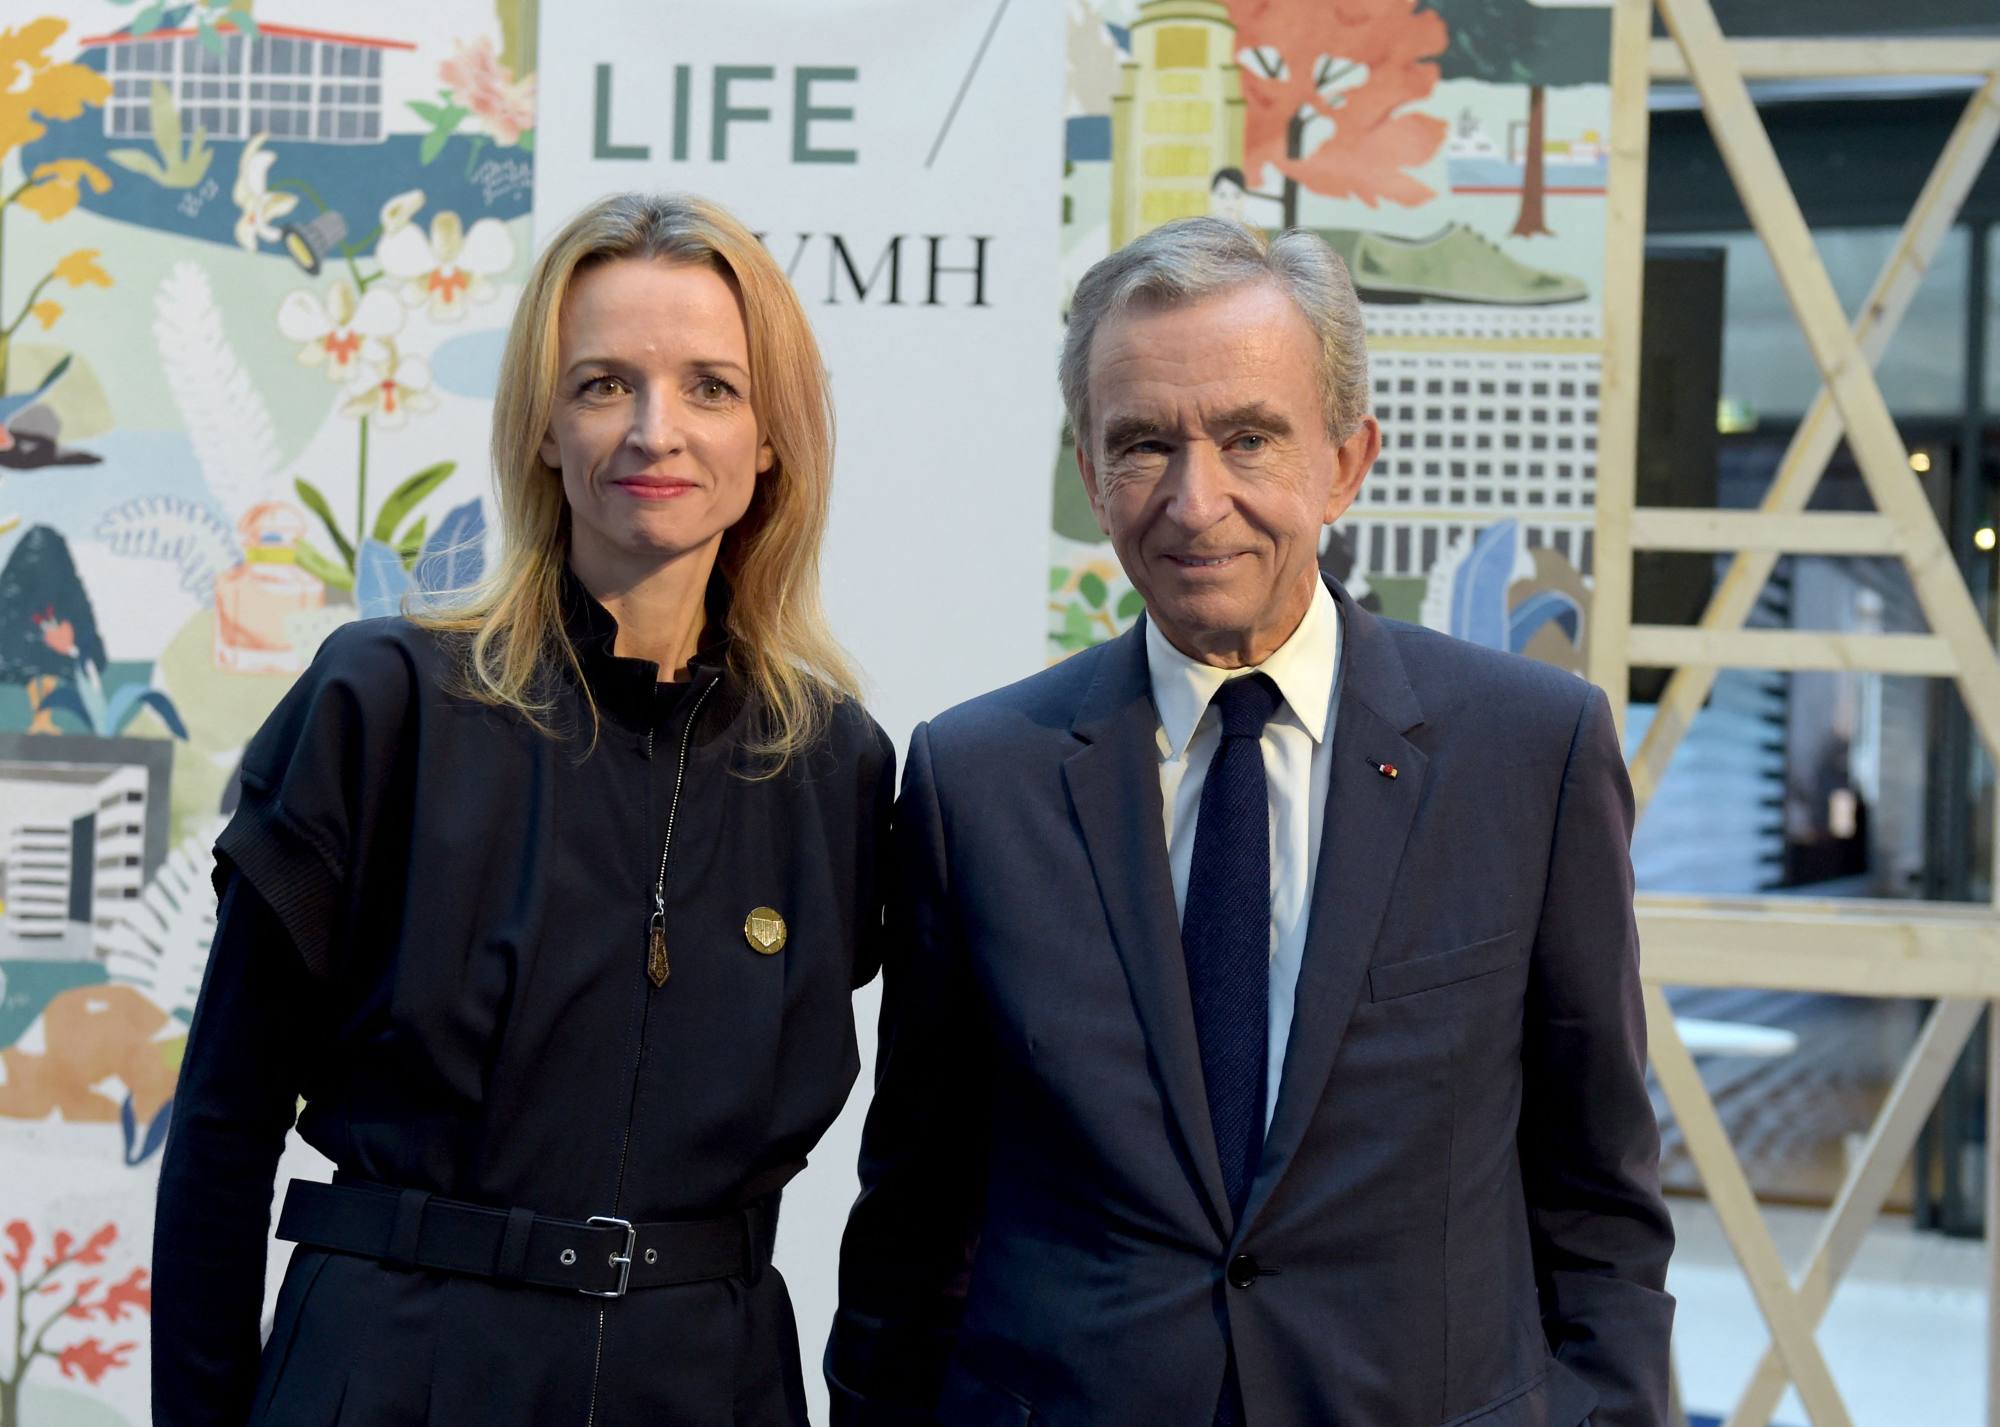 Bernard Arnault holds monthly lunches with five kids on strategy for LVMH